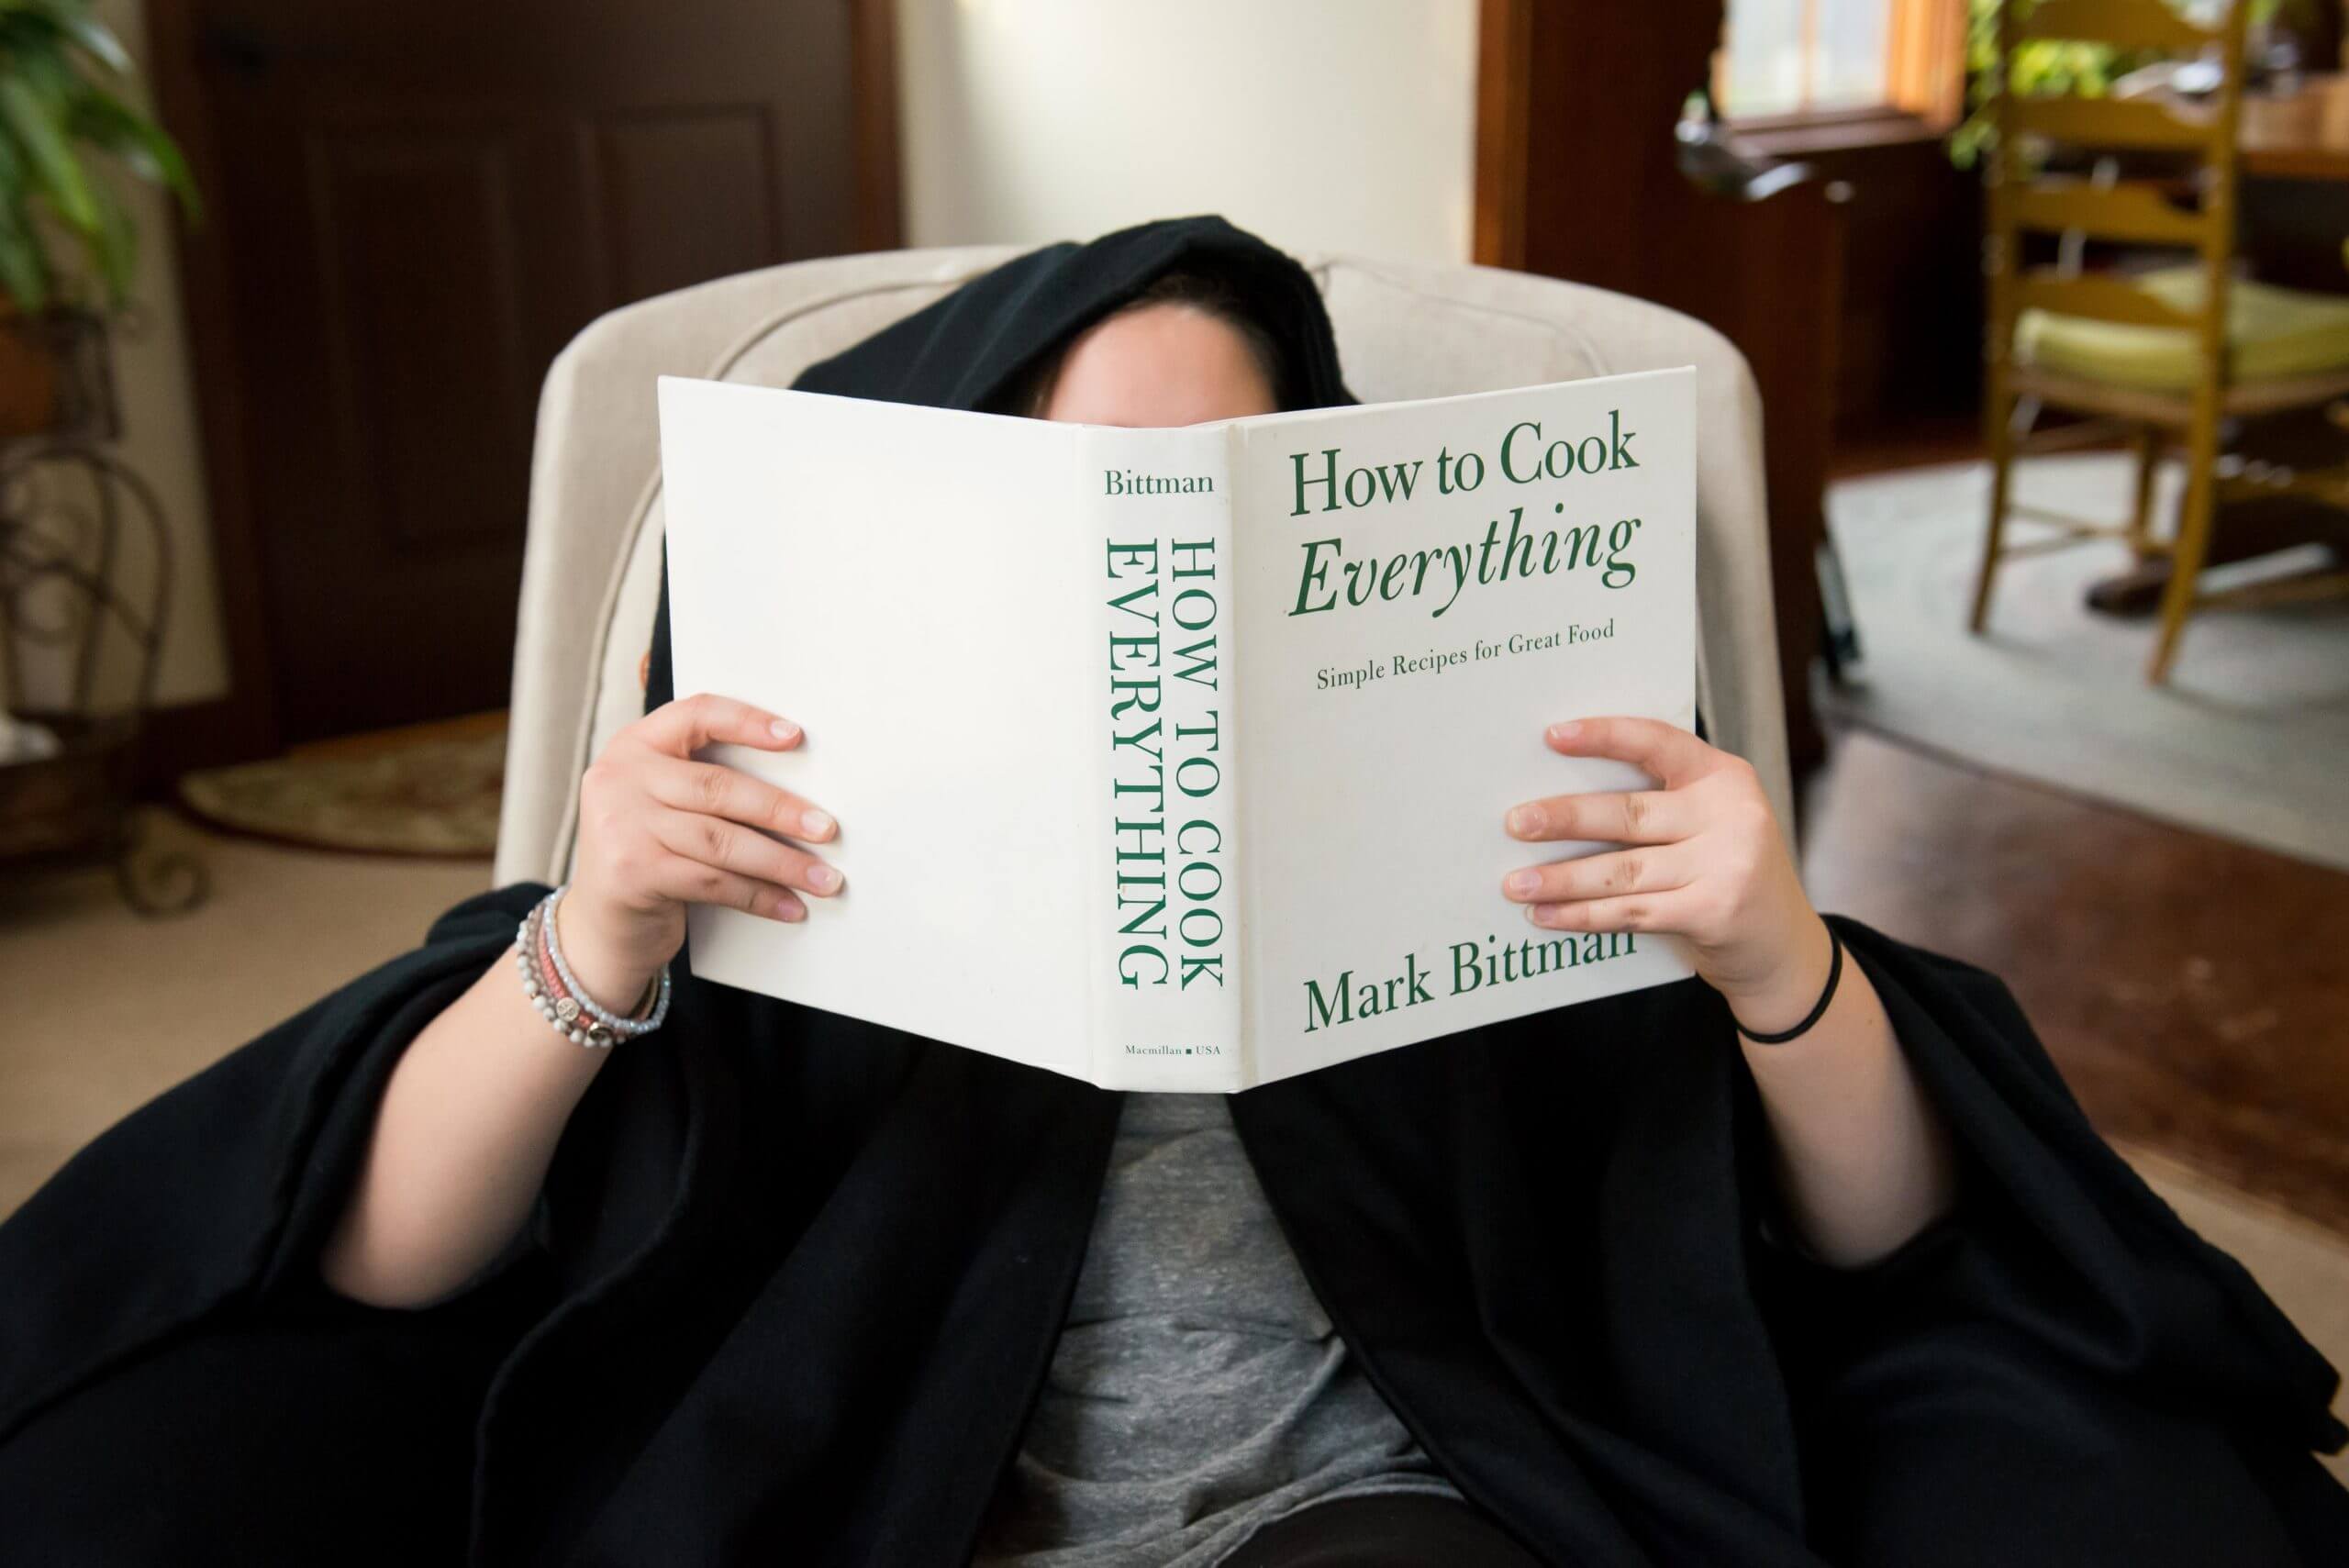 A person sitting in a chair is reading "How to Cook Everything" by Mark Bittman.